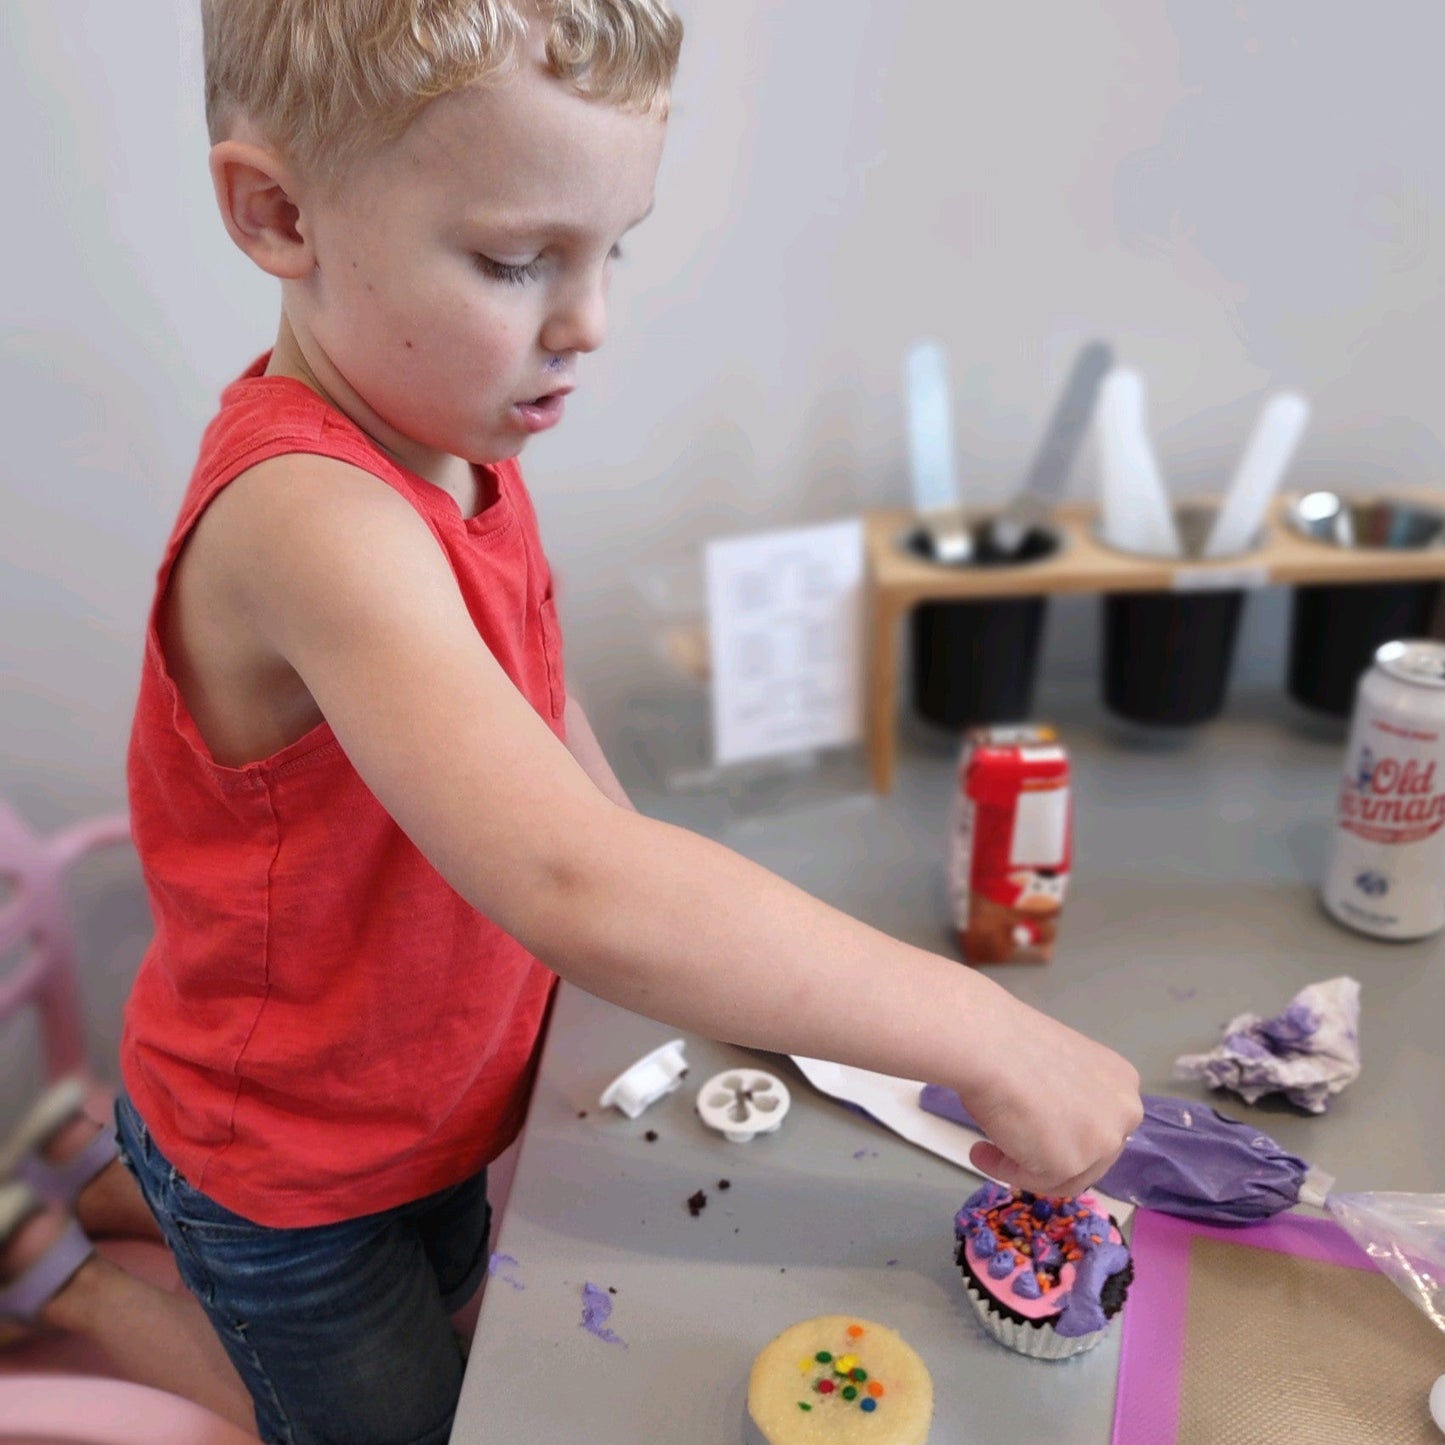 A little boy carefuly adds sprinkles to his pink and purple cupcake.